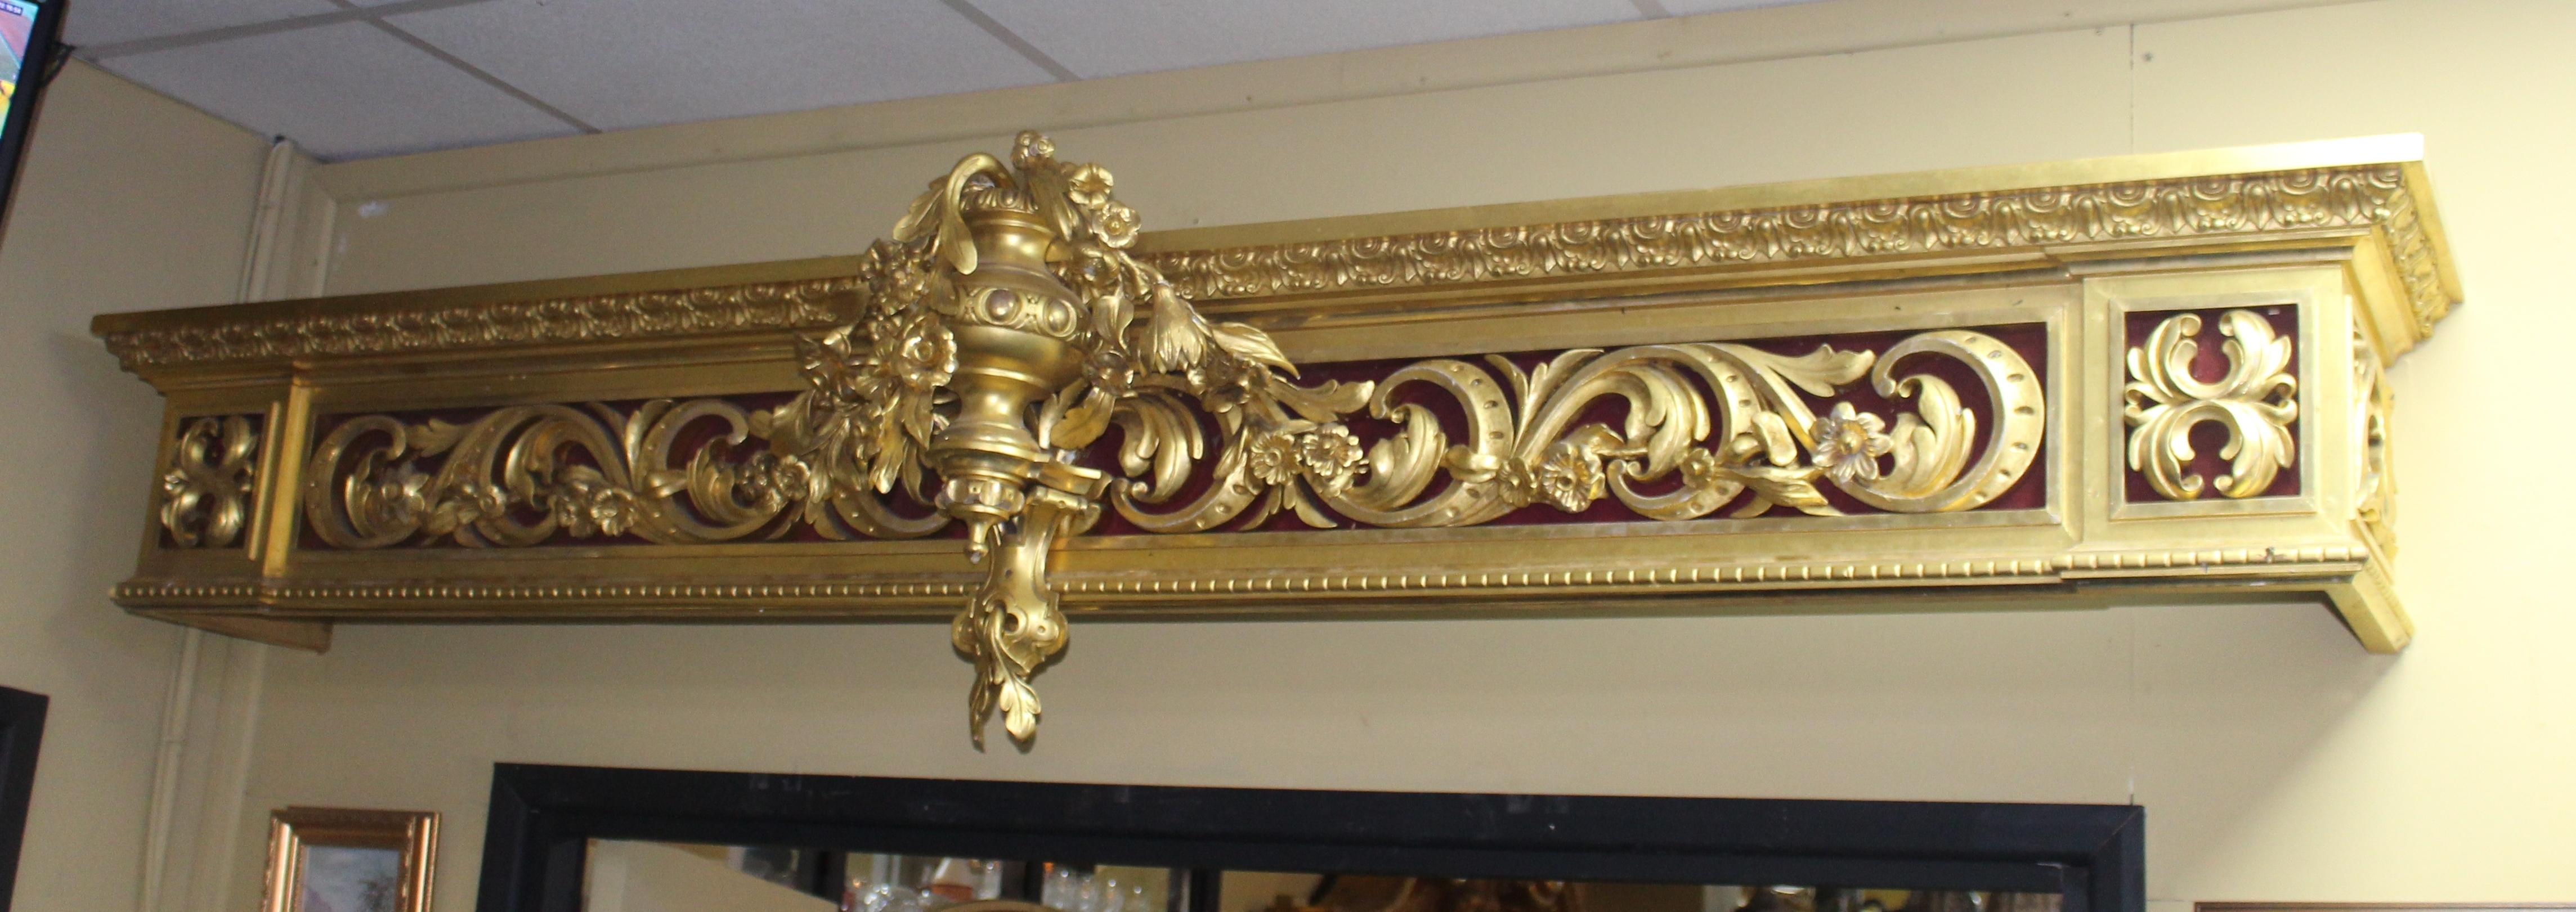 Regency Carved Giltwood Window Pelmet by D.J.McLauchlan, London In Good Condition For Sale In Worcester, GB